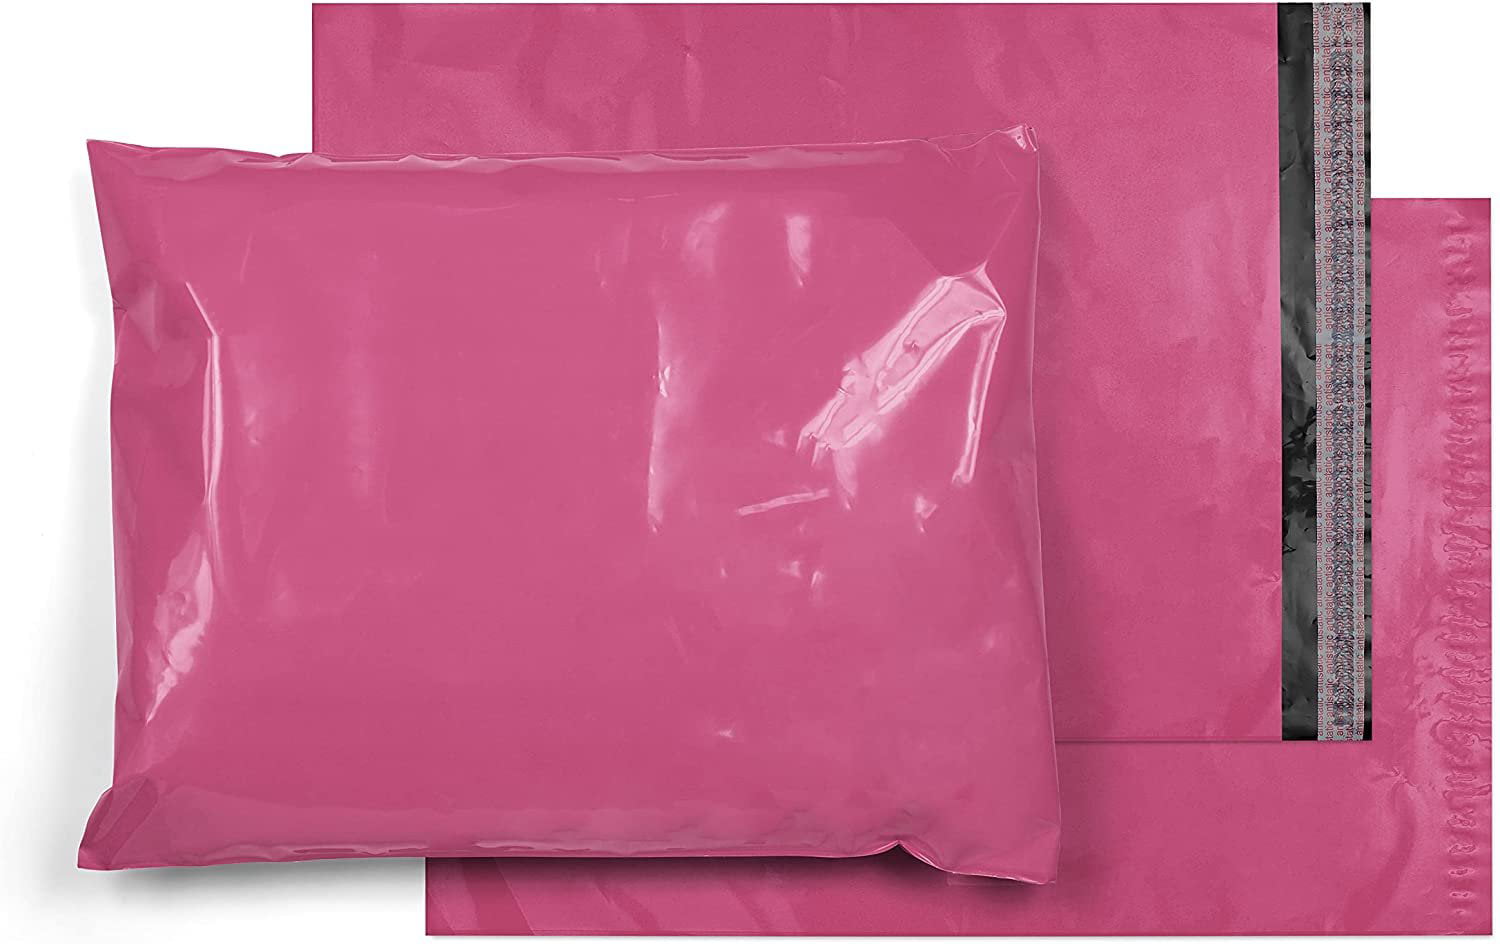 14x17 hot pink poly mailers